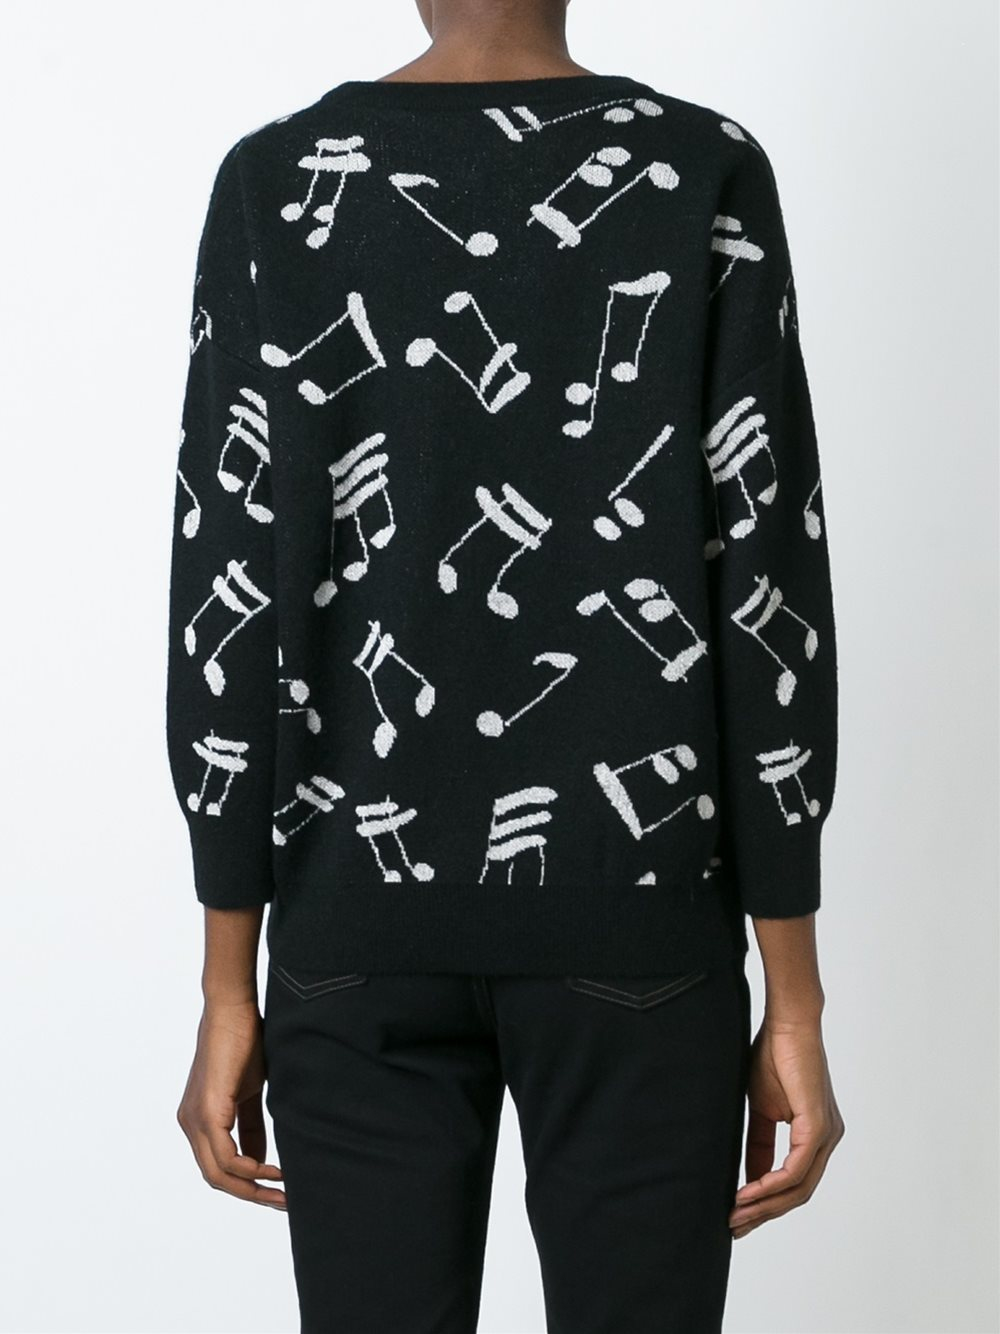 Saint Laurent Synthetic Music Note Printed Sweater in Black - Lyst